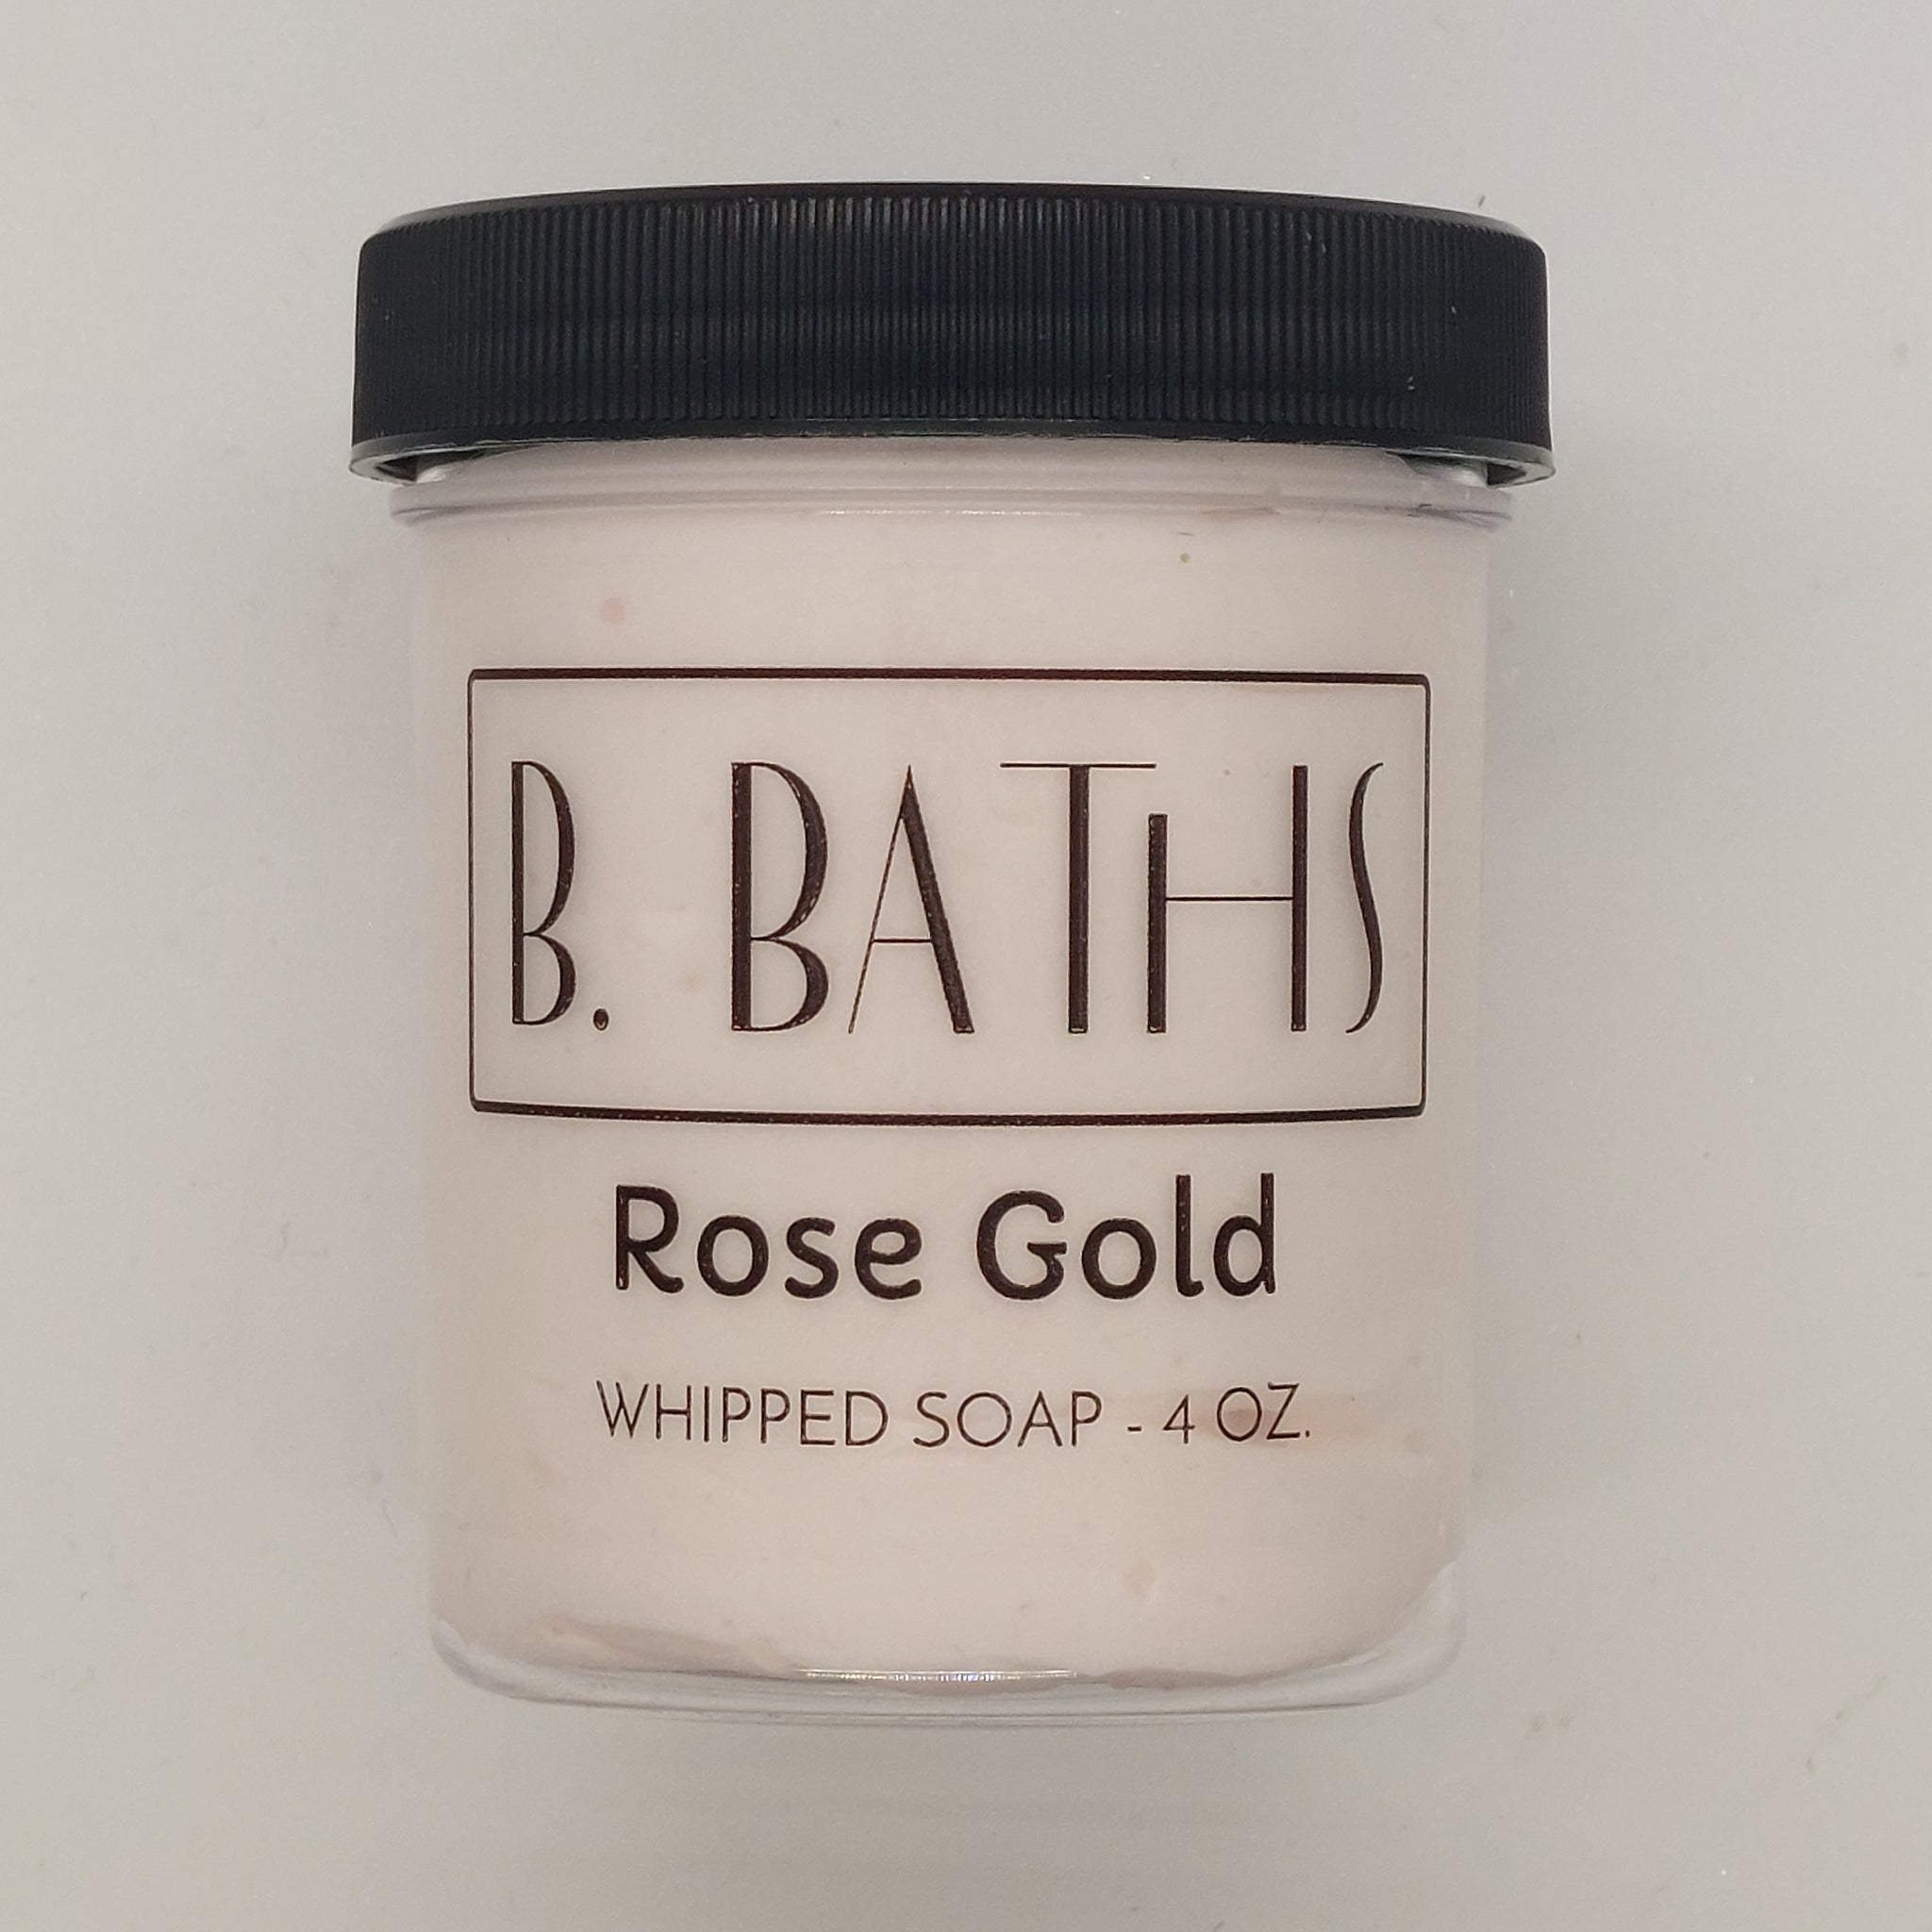 Rose Gold Whipped Soap